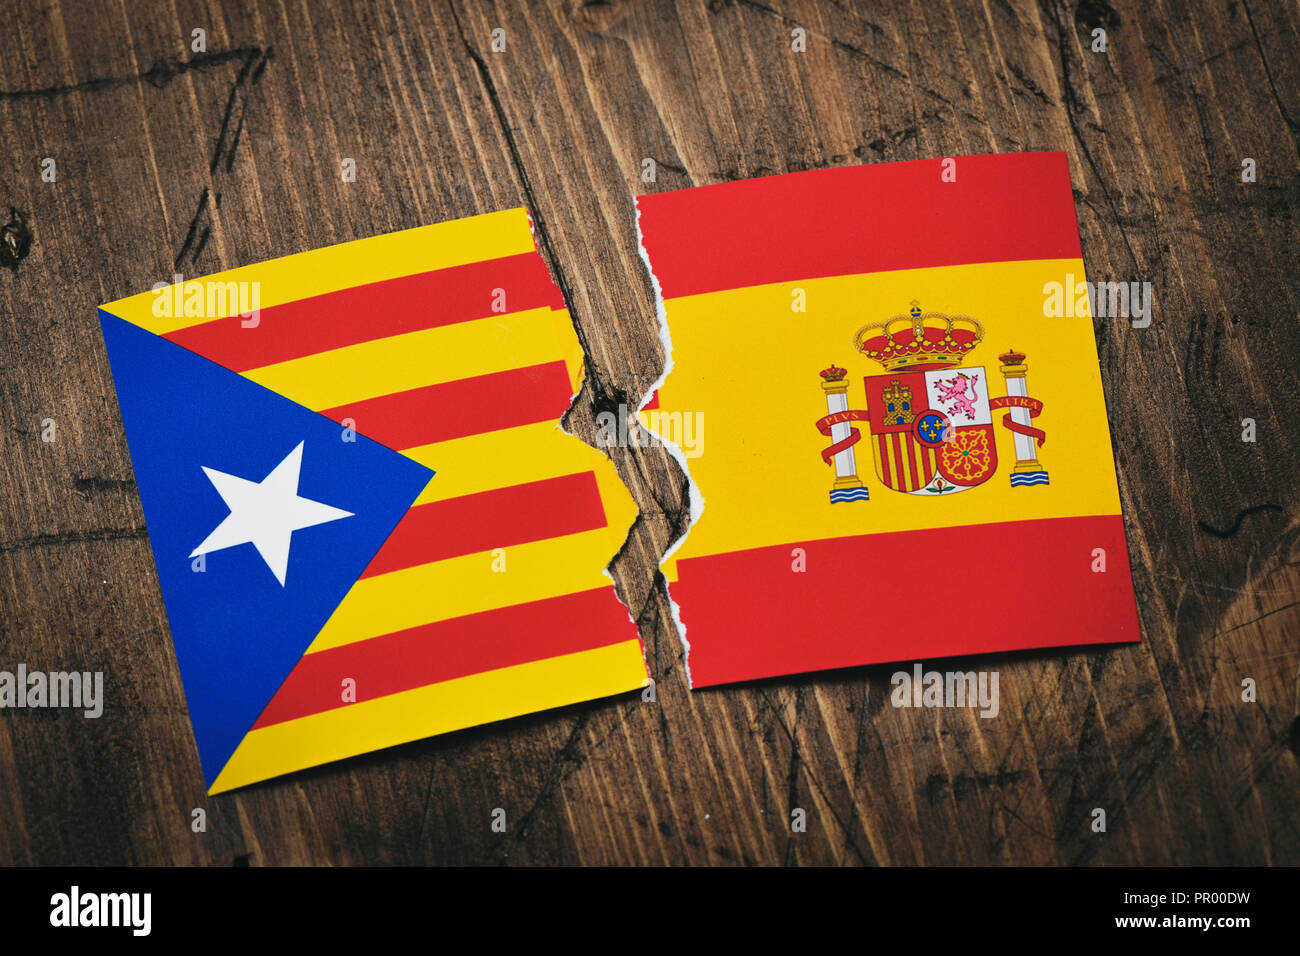 the Estelada, the Catalan pro-independence flag, and the flag of Spain, broken on a rustic wooden surface Stock Photo